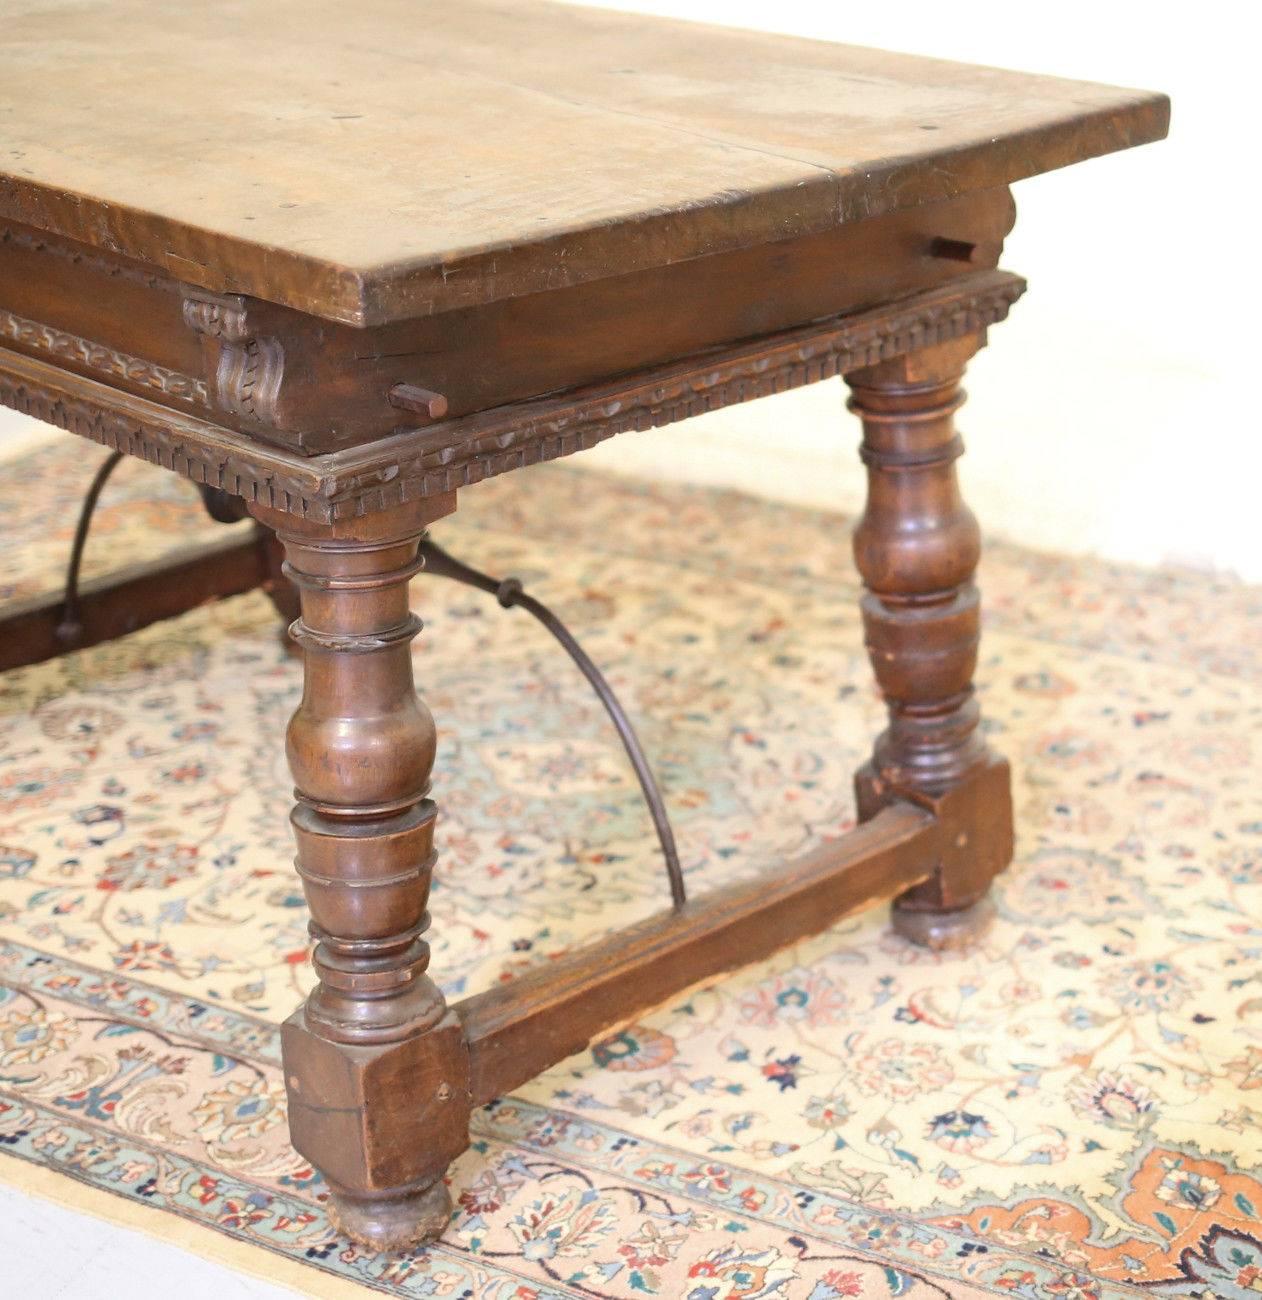 18th Century Continental Rustic Desk Possibly Italian with Iron Supports In Good Condition For Sale In Pasadena, CA